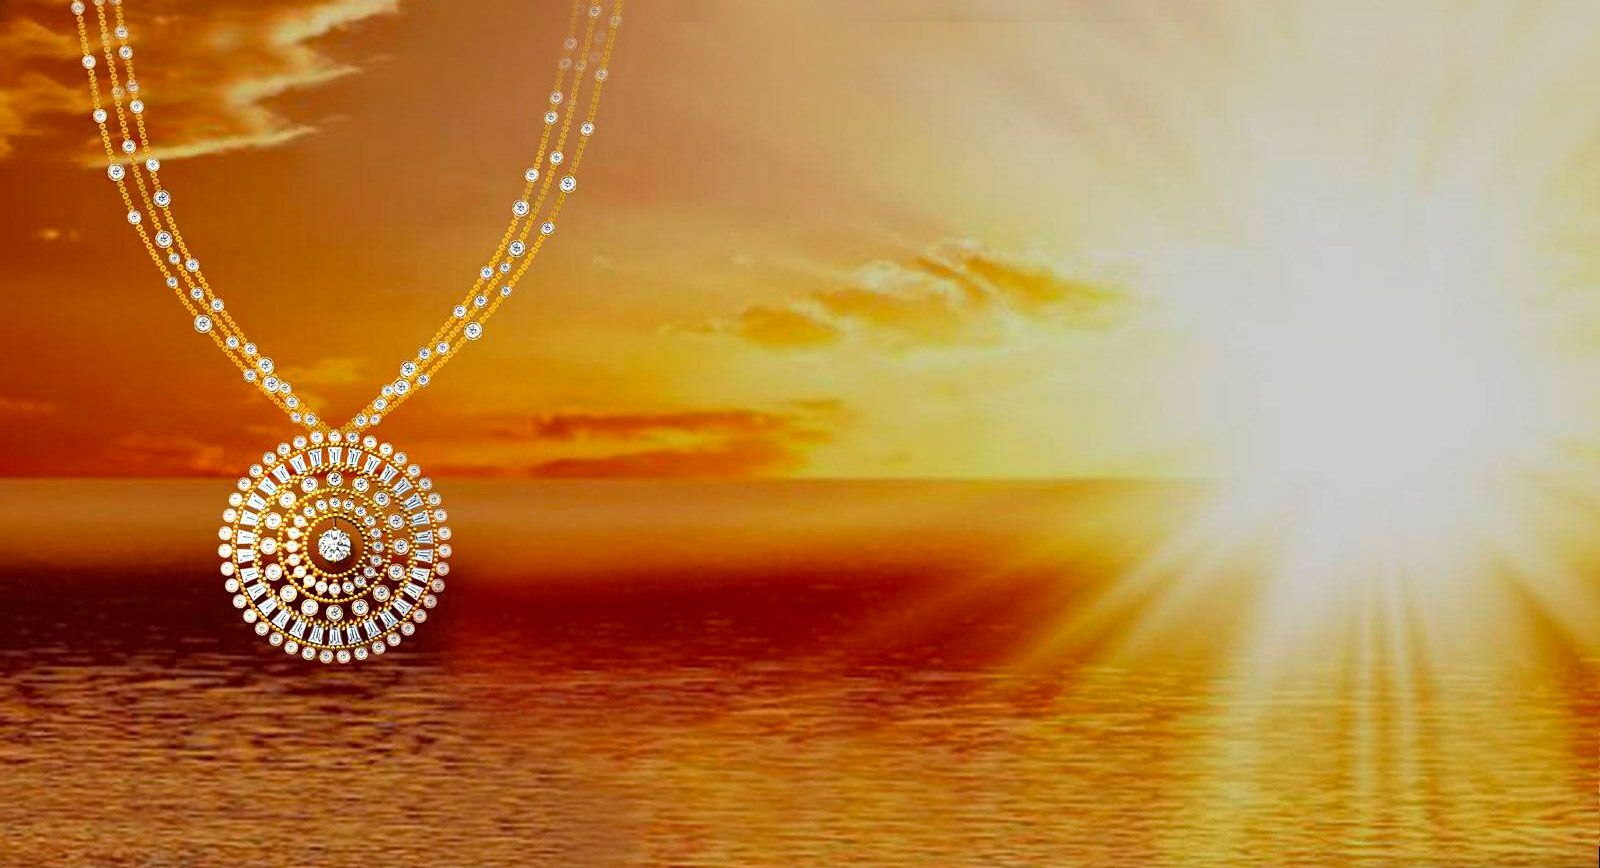 Luxury by Harakh: One of a kind necklace, 'The Sunlight' sold at Sotheby’s auction